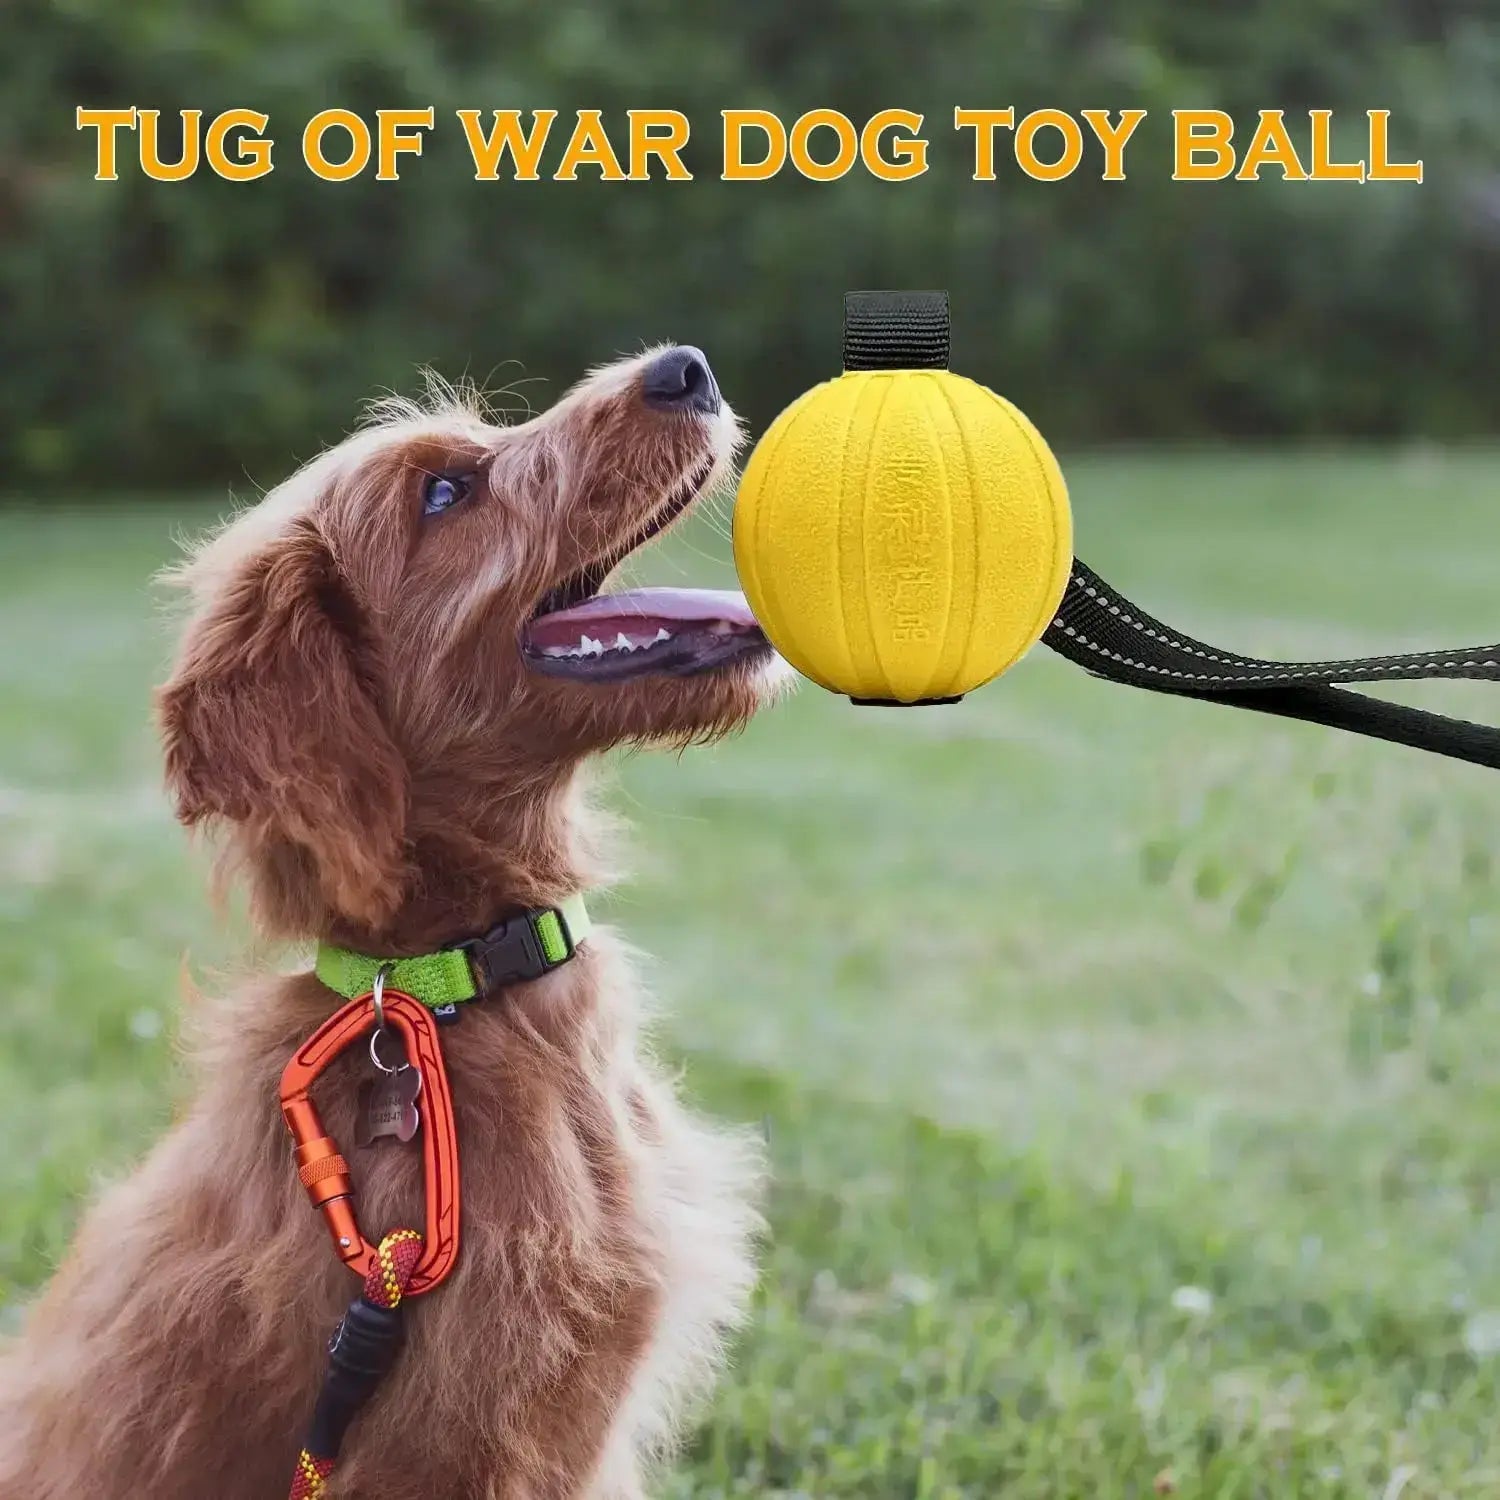 Dog Toy Balls On a Rope | Paws Palace storeBuy Dog Toy Balls On a Rope for Small Medium Large Dogs Chewers, Durable Interactive Balls for Training, and Free Delivery£6.9